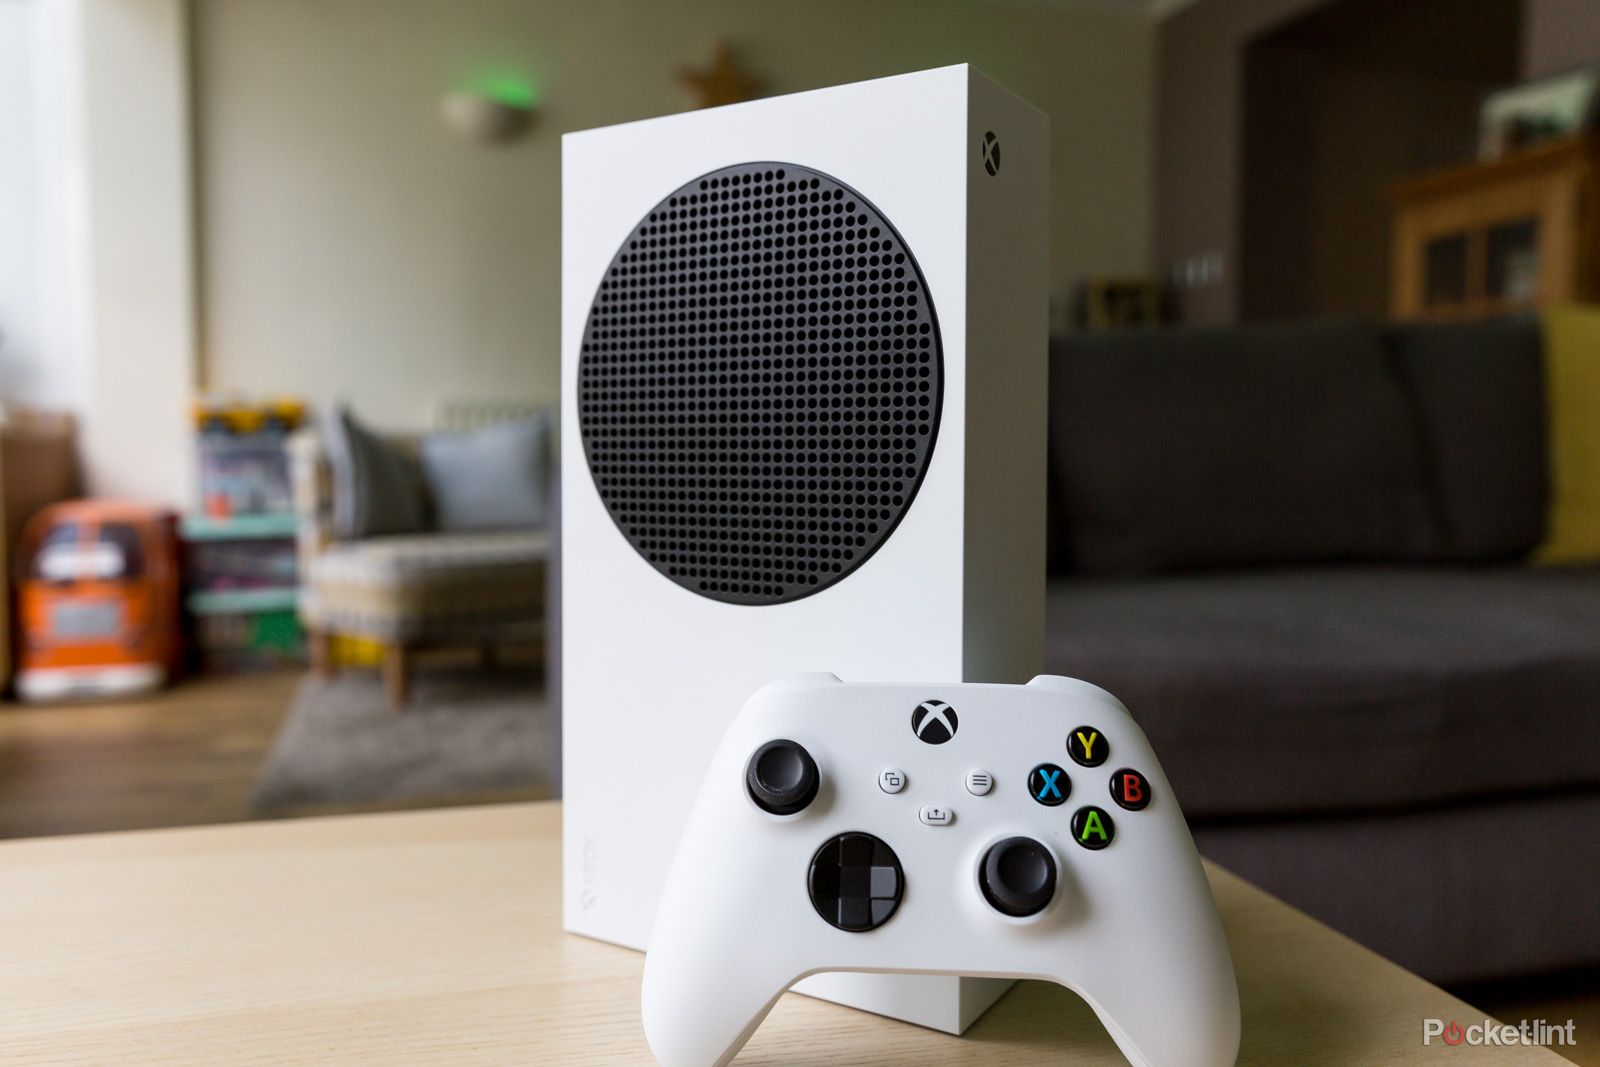 The Xbox Series S stood on the table